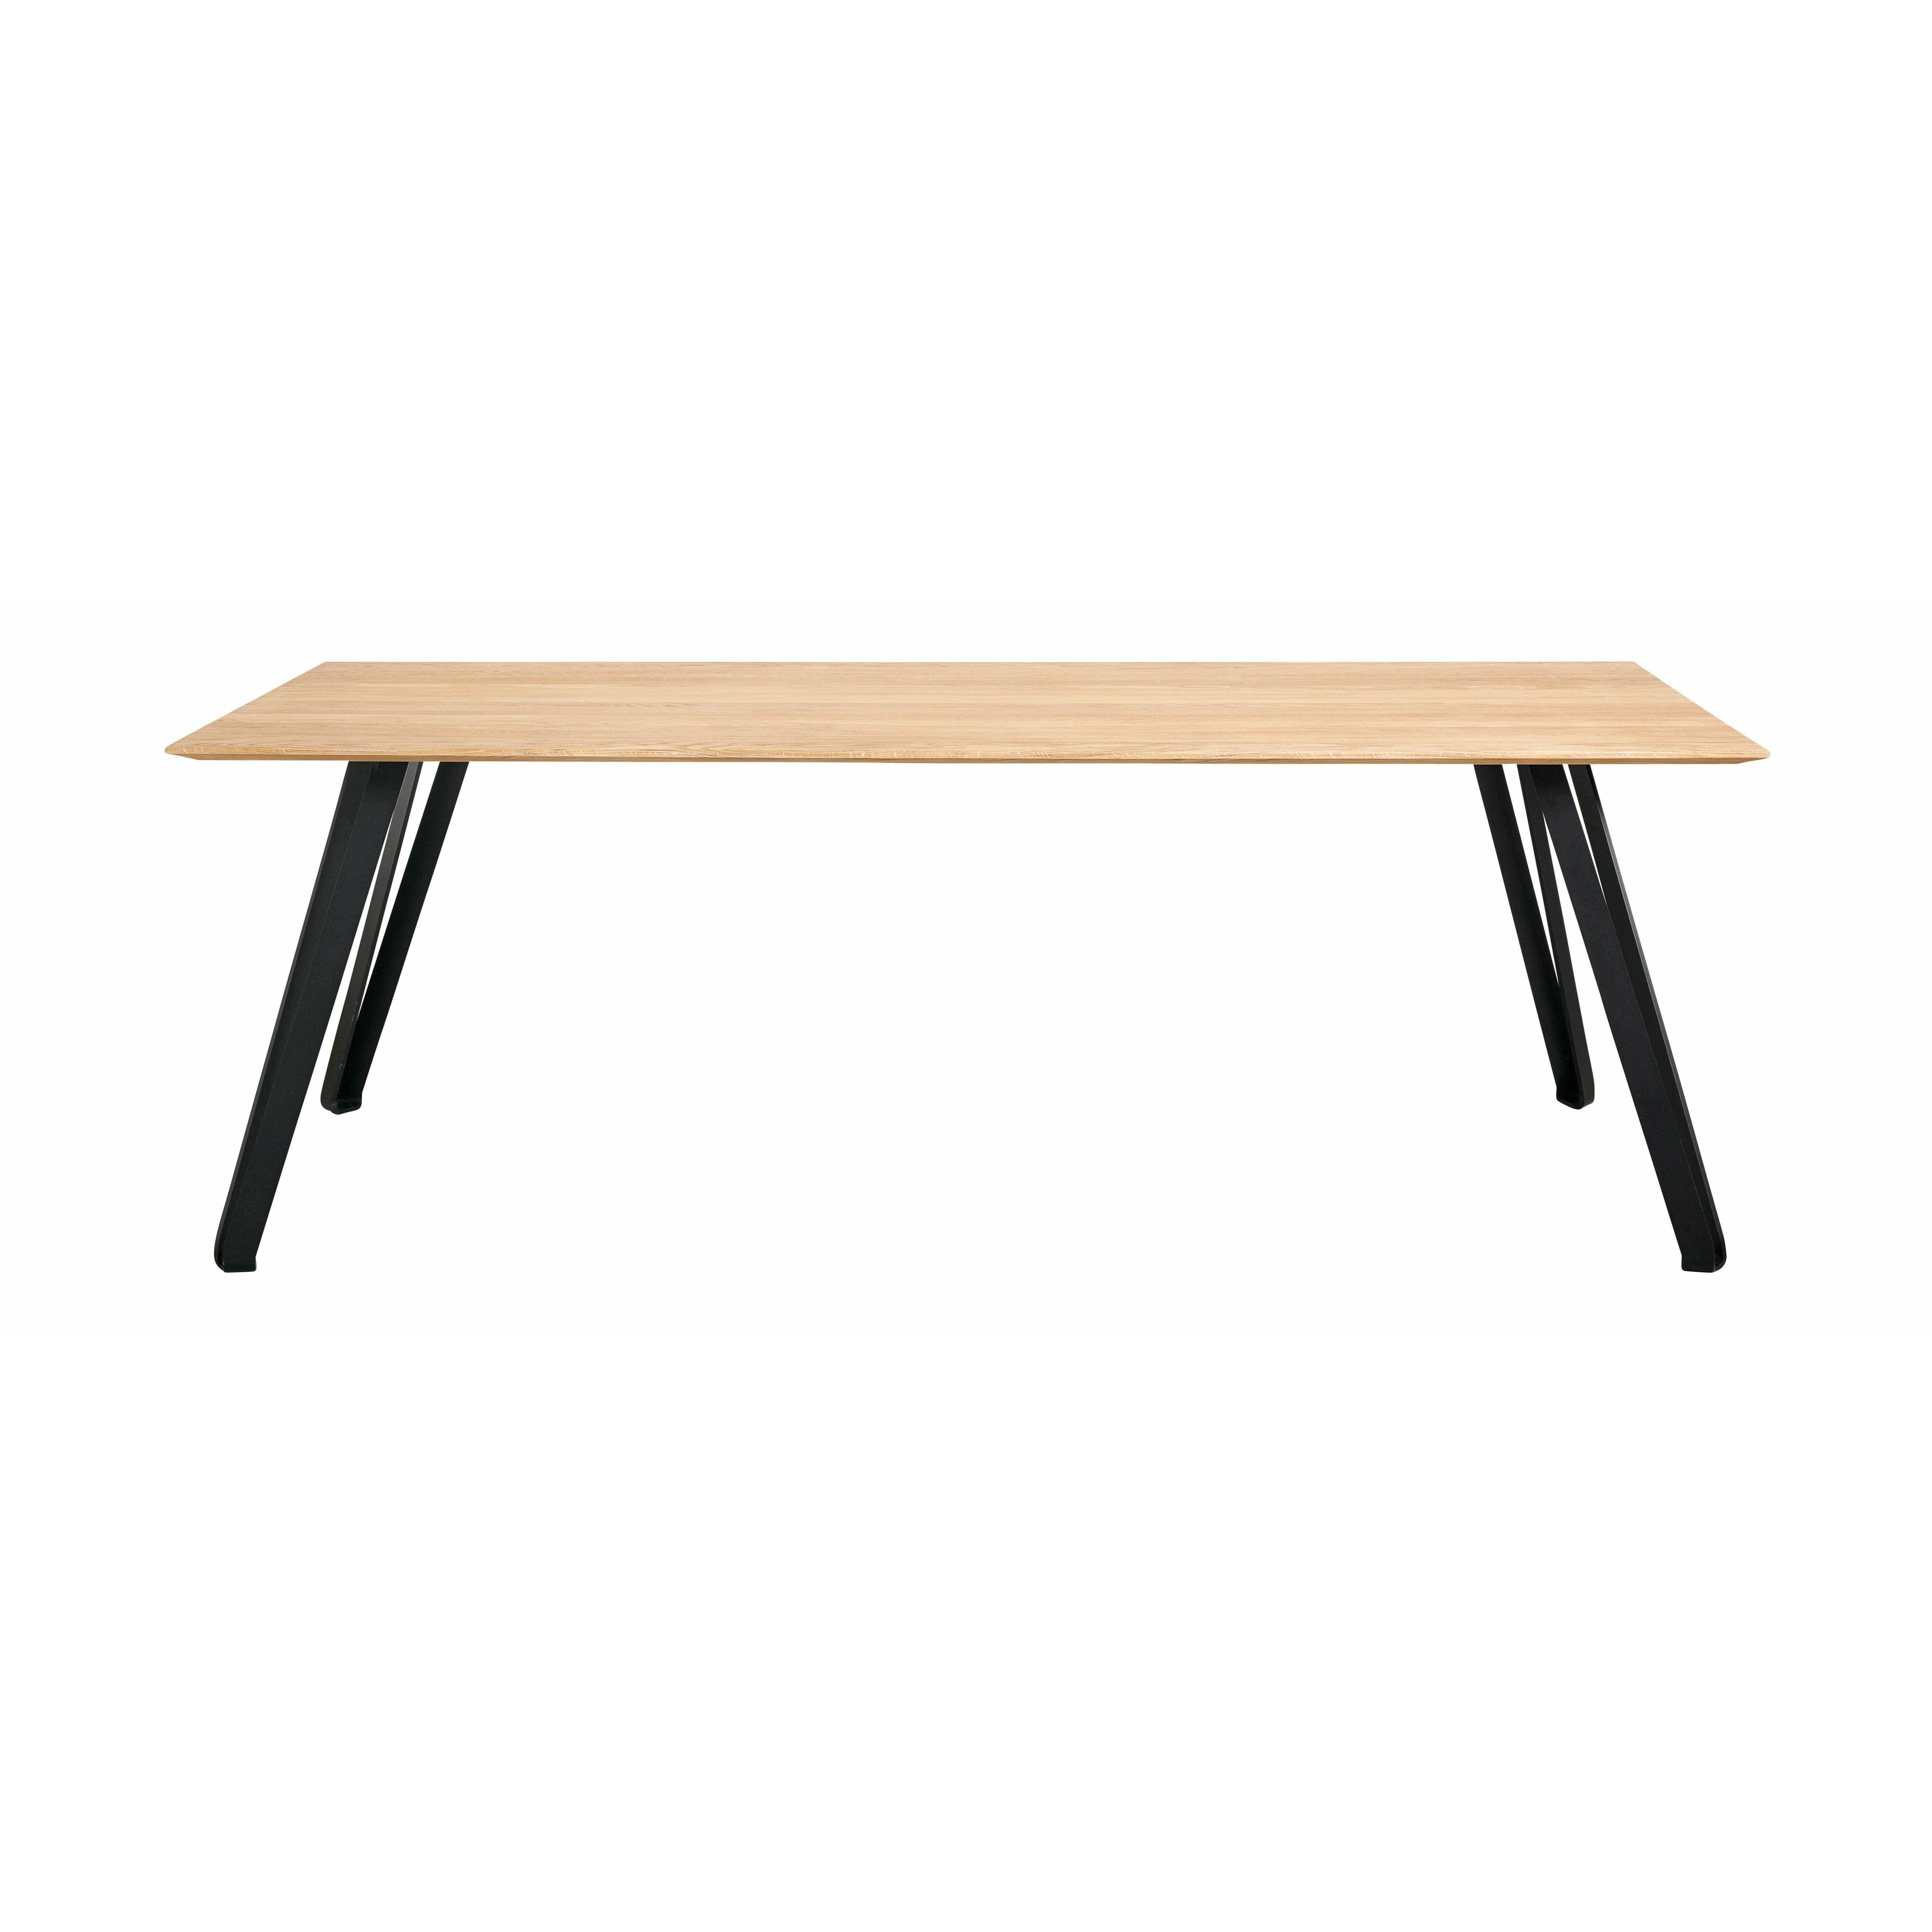 Muubs Space Jading Table, 220 cm